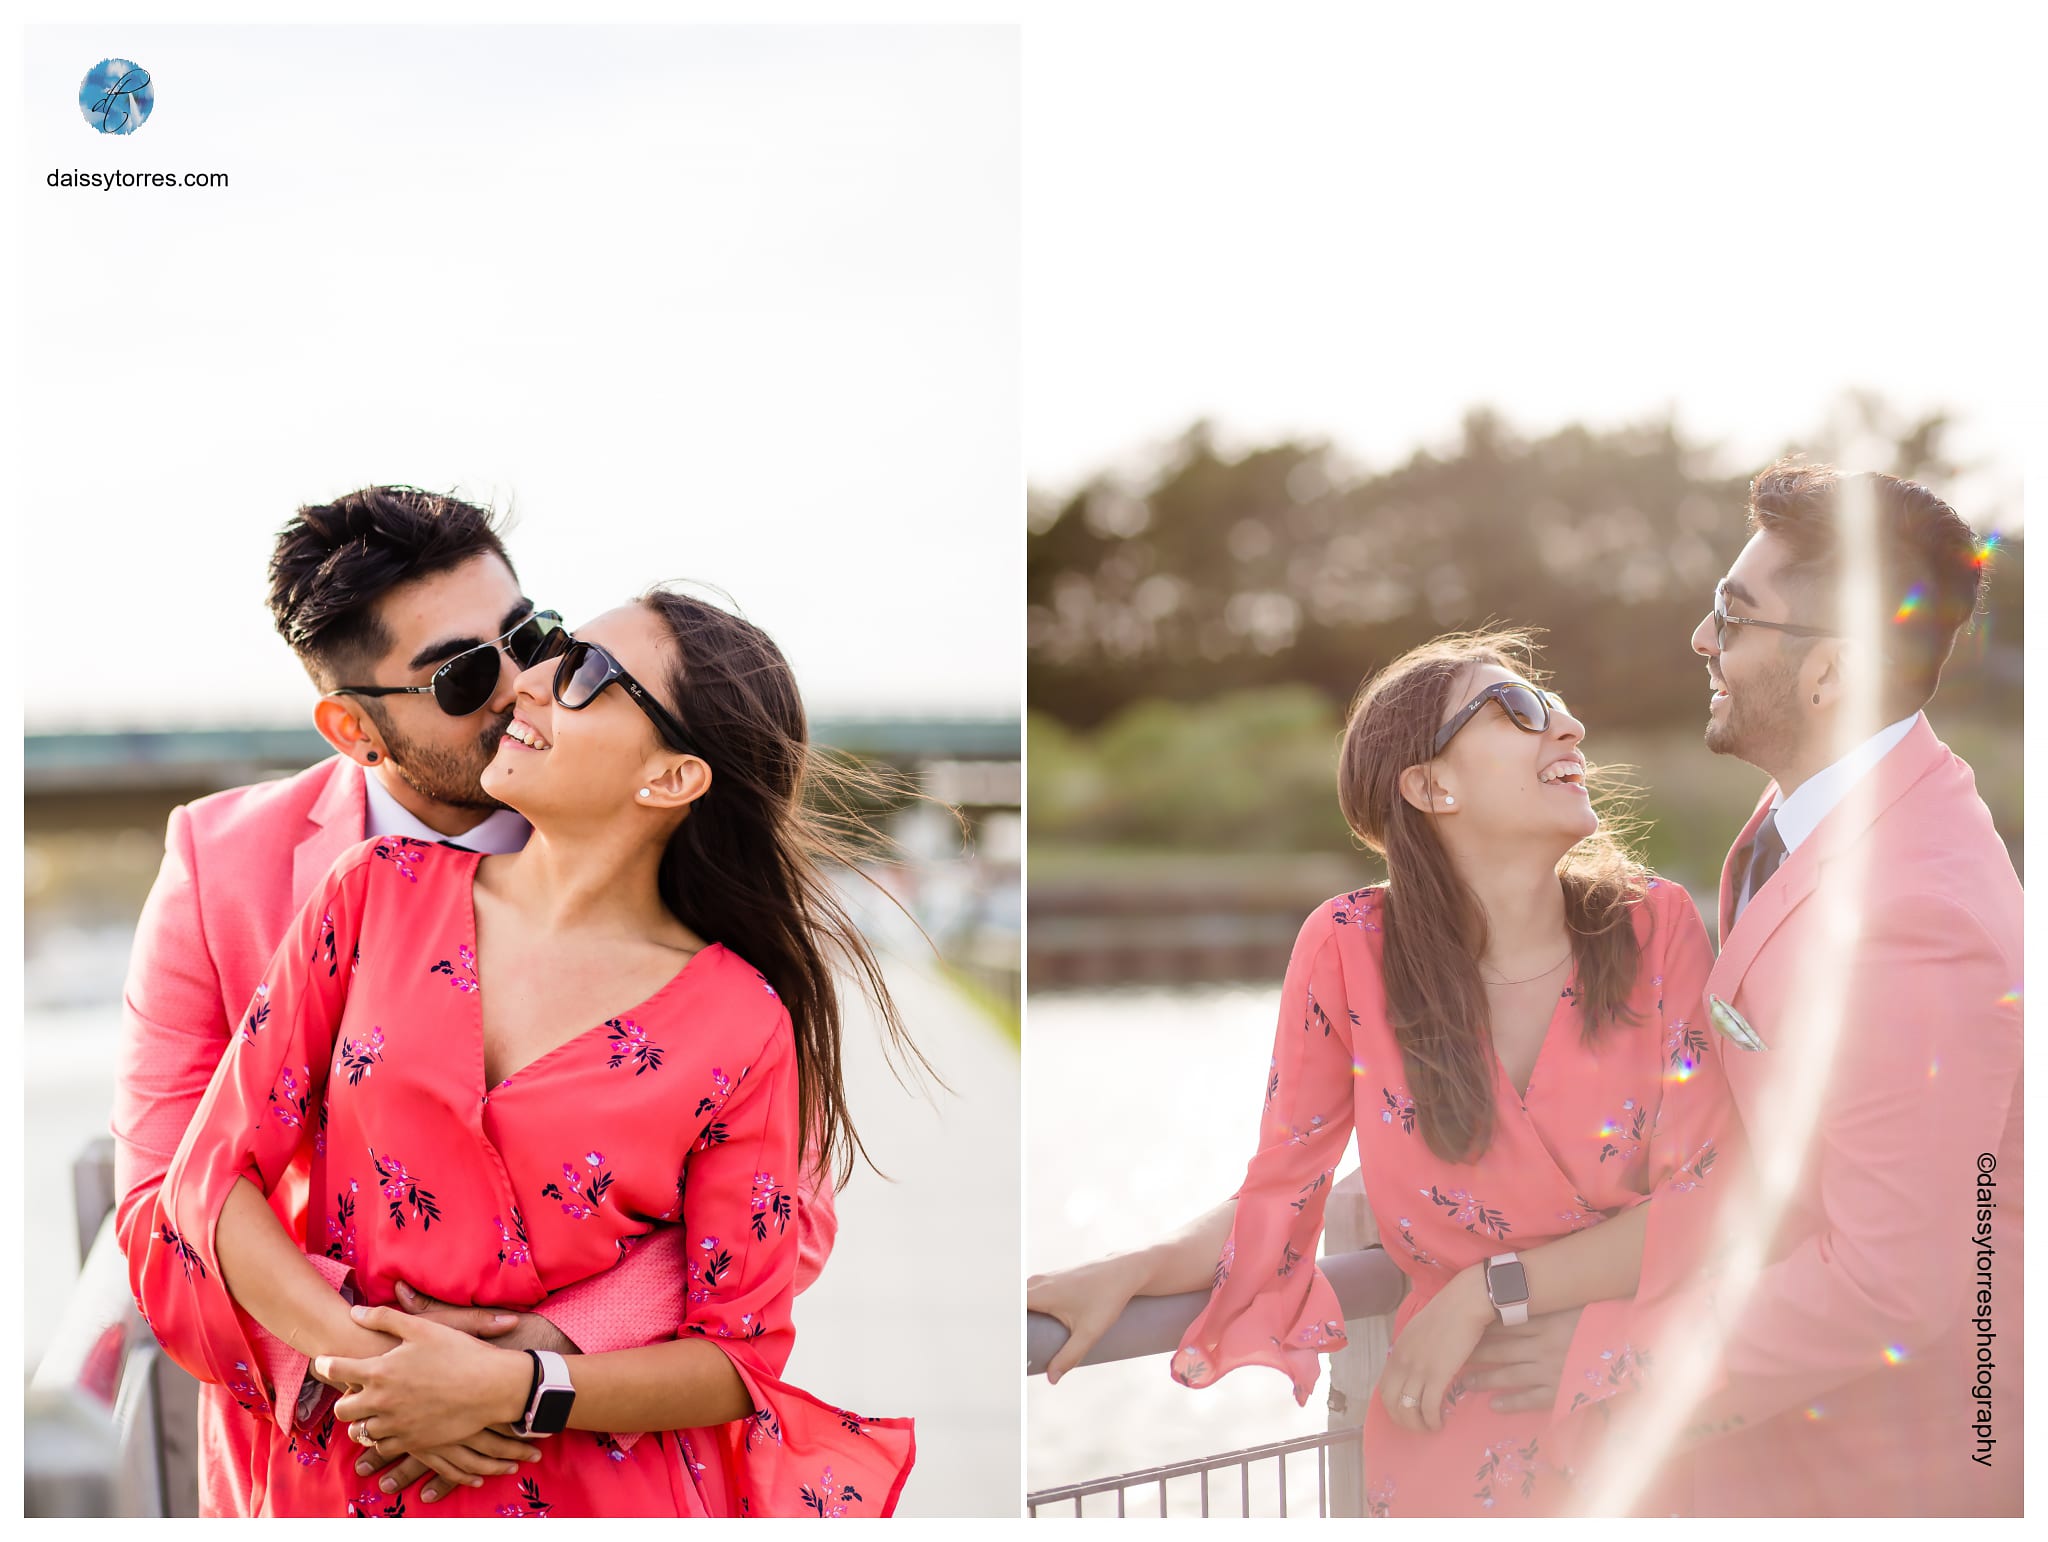 Rudee Inlet Engagement Session by Daissy Torres Photography